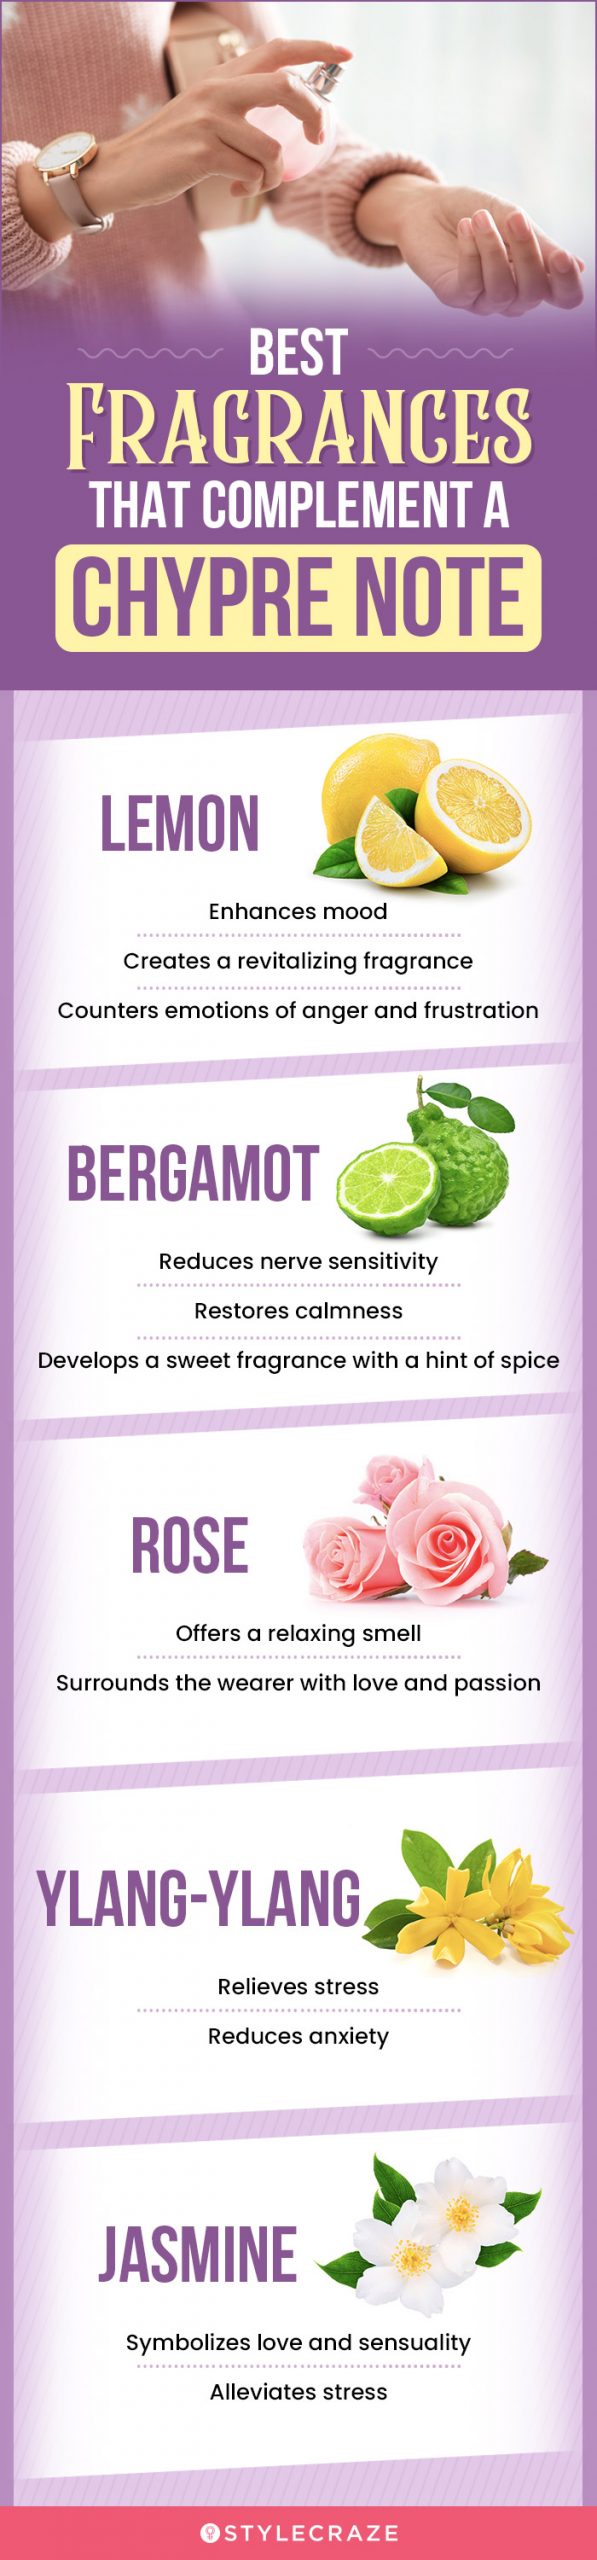 Best Fragrances That Will Complement A Chypre Perfume (infographic)